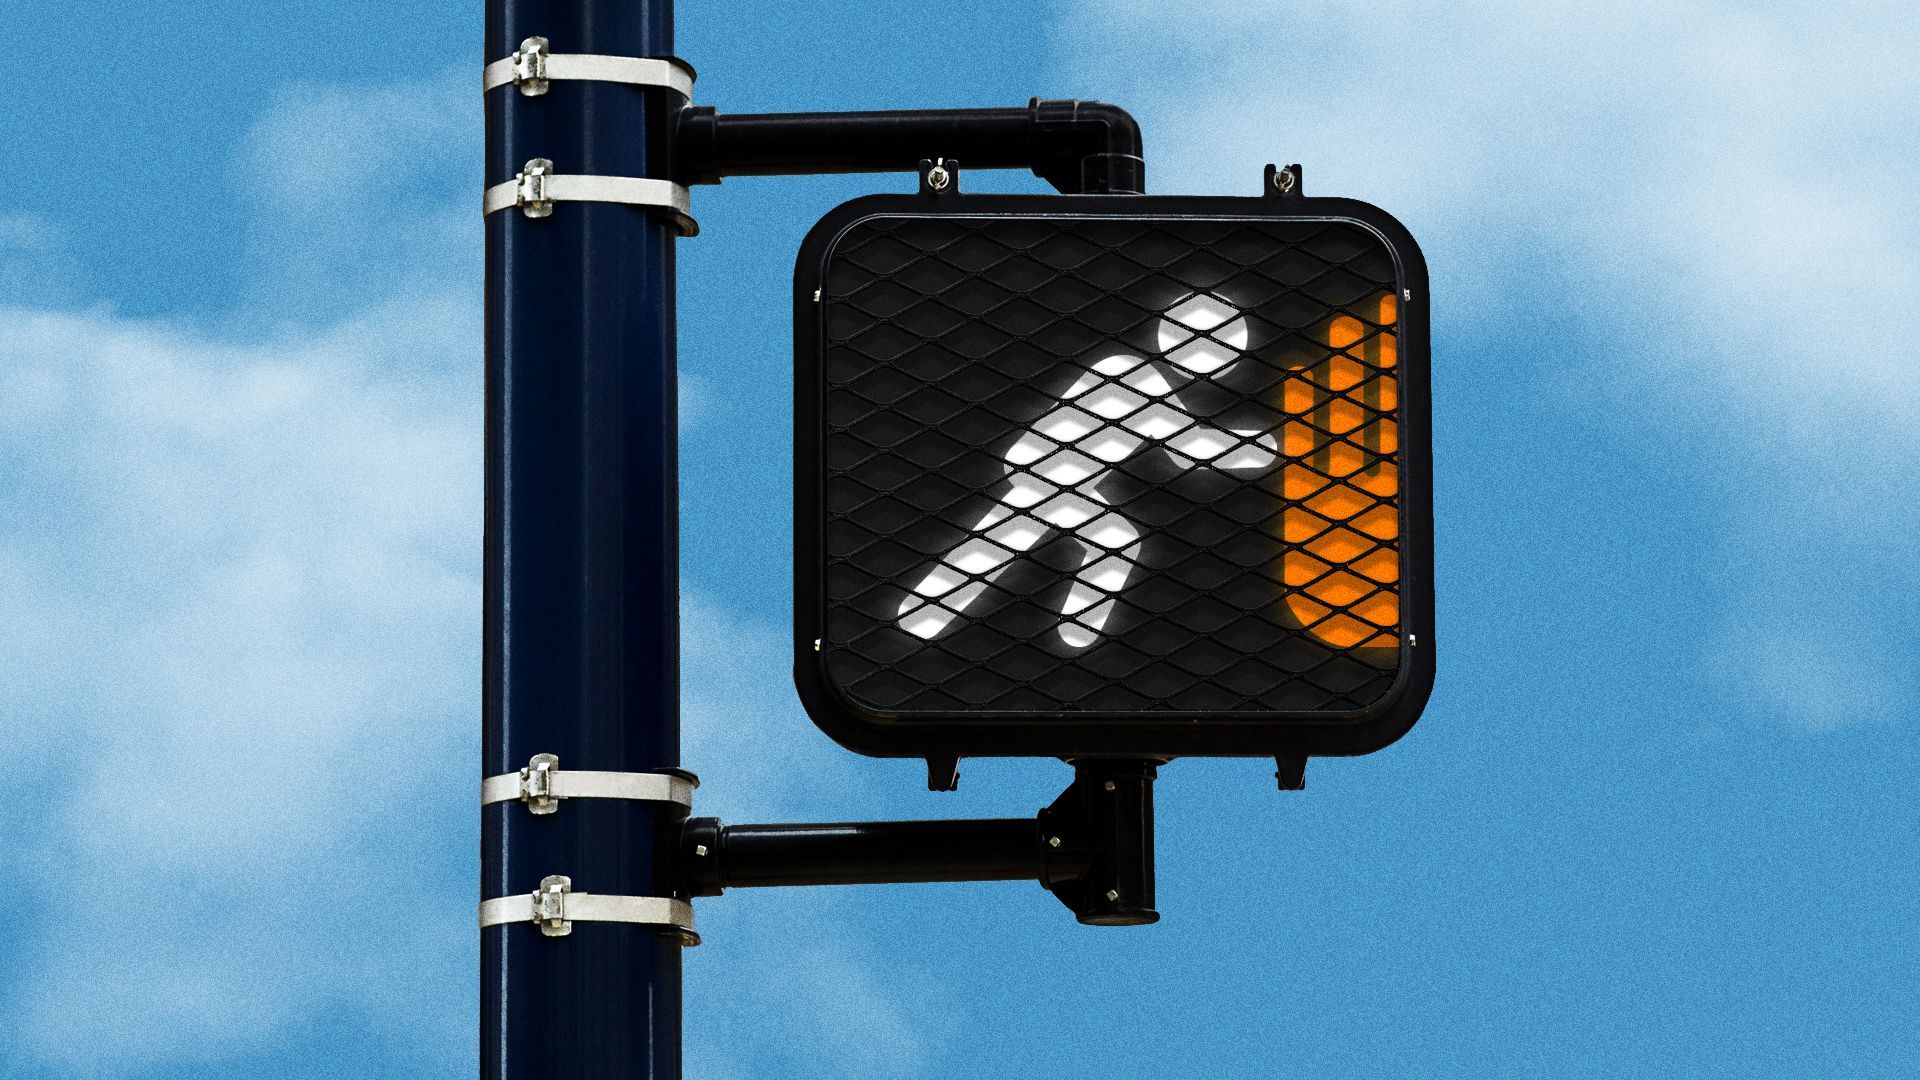 Illustration of a walking signal pushing the "do not walk" hand out of frame.